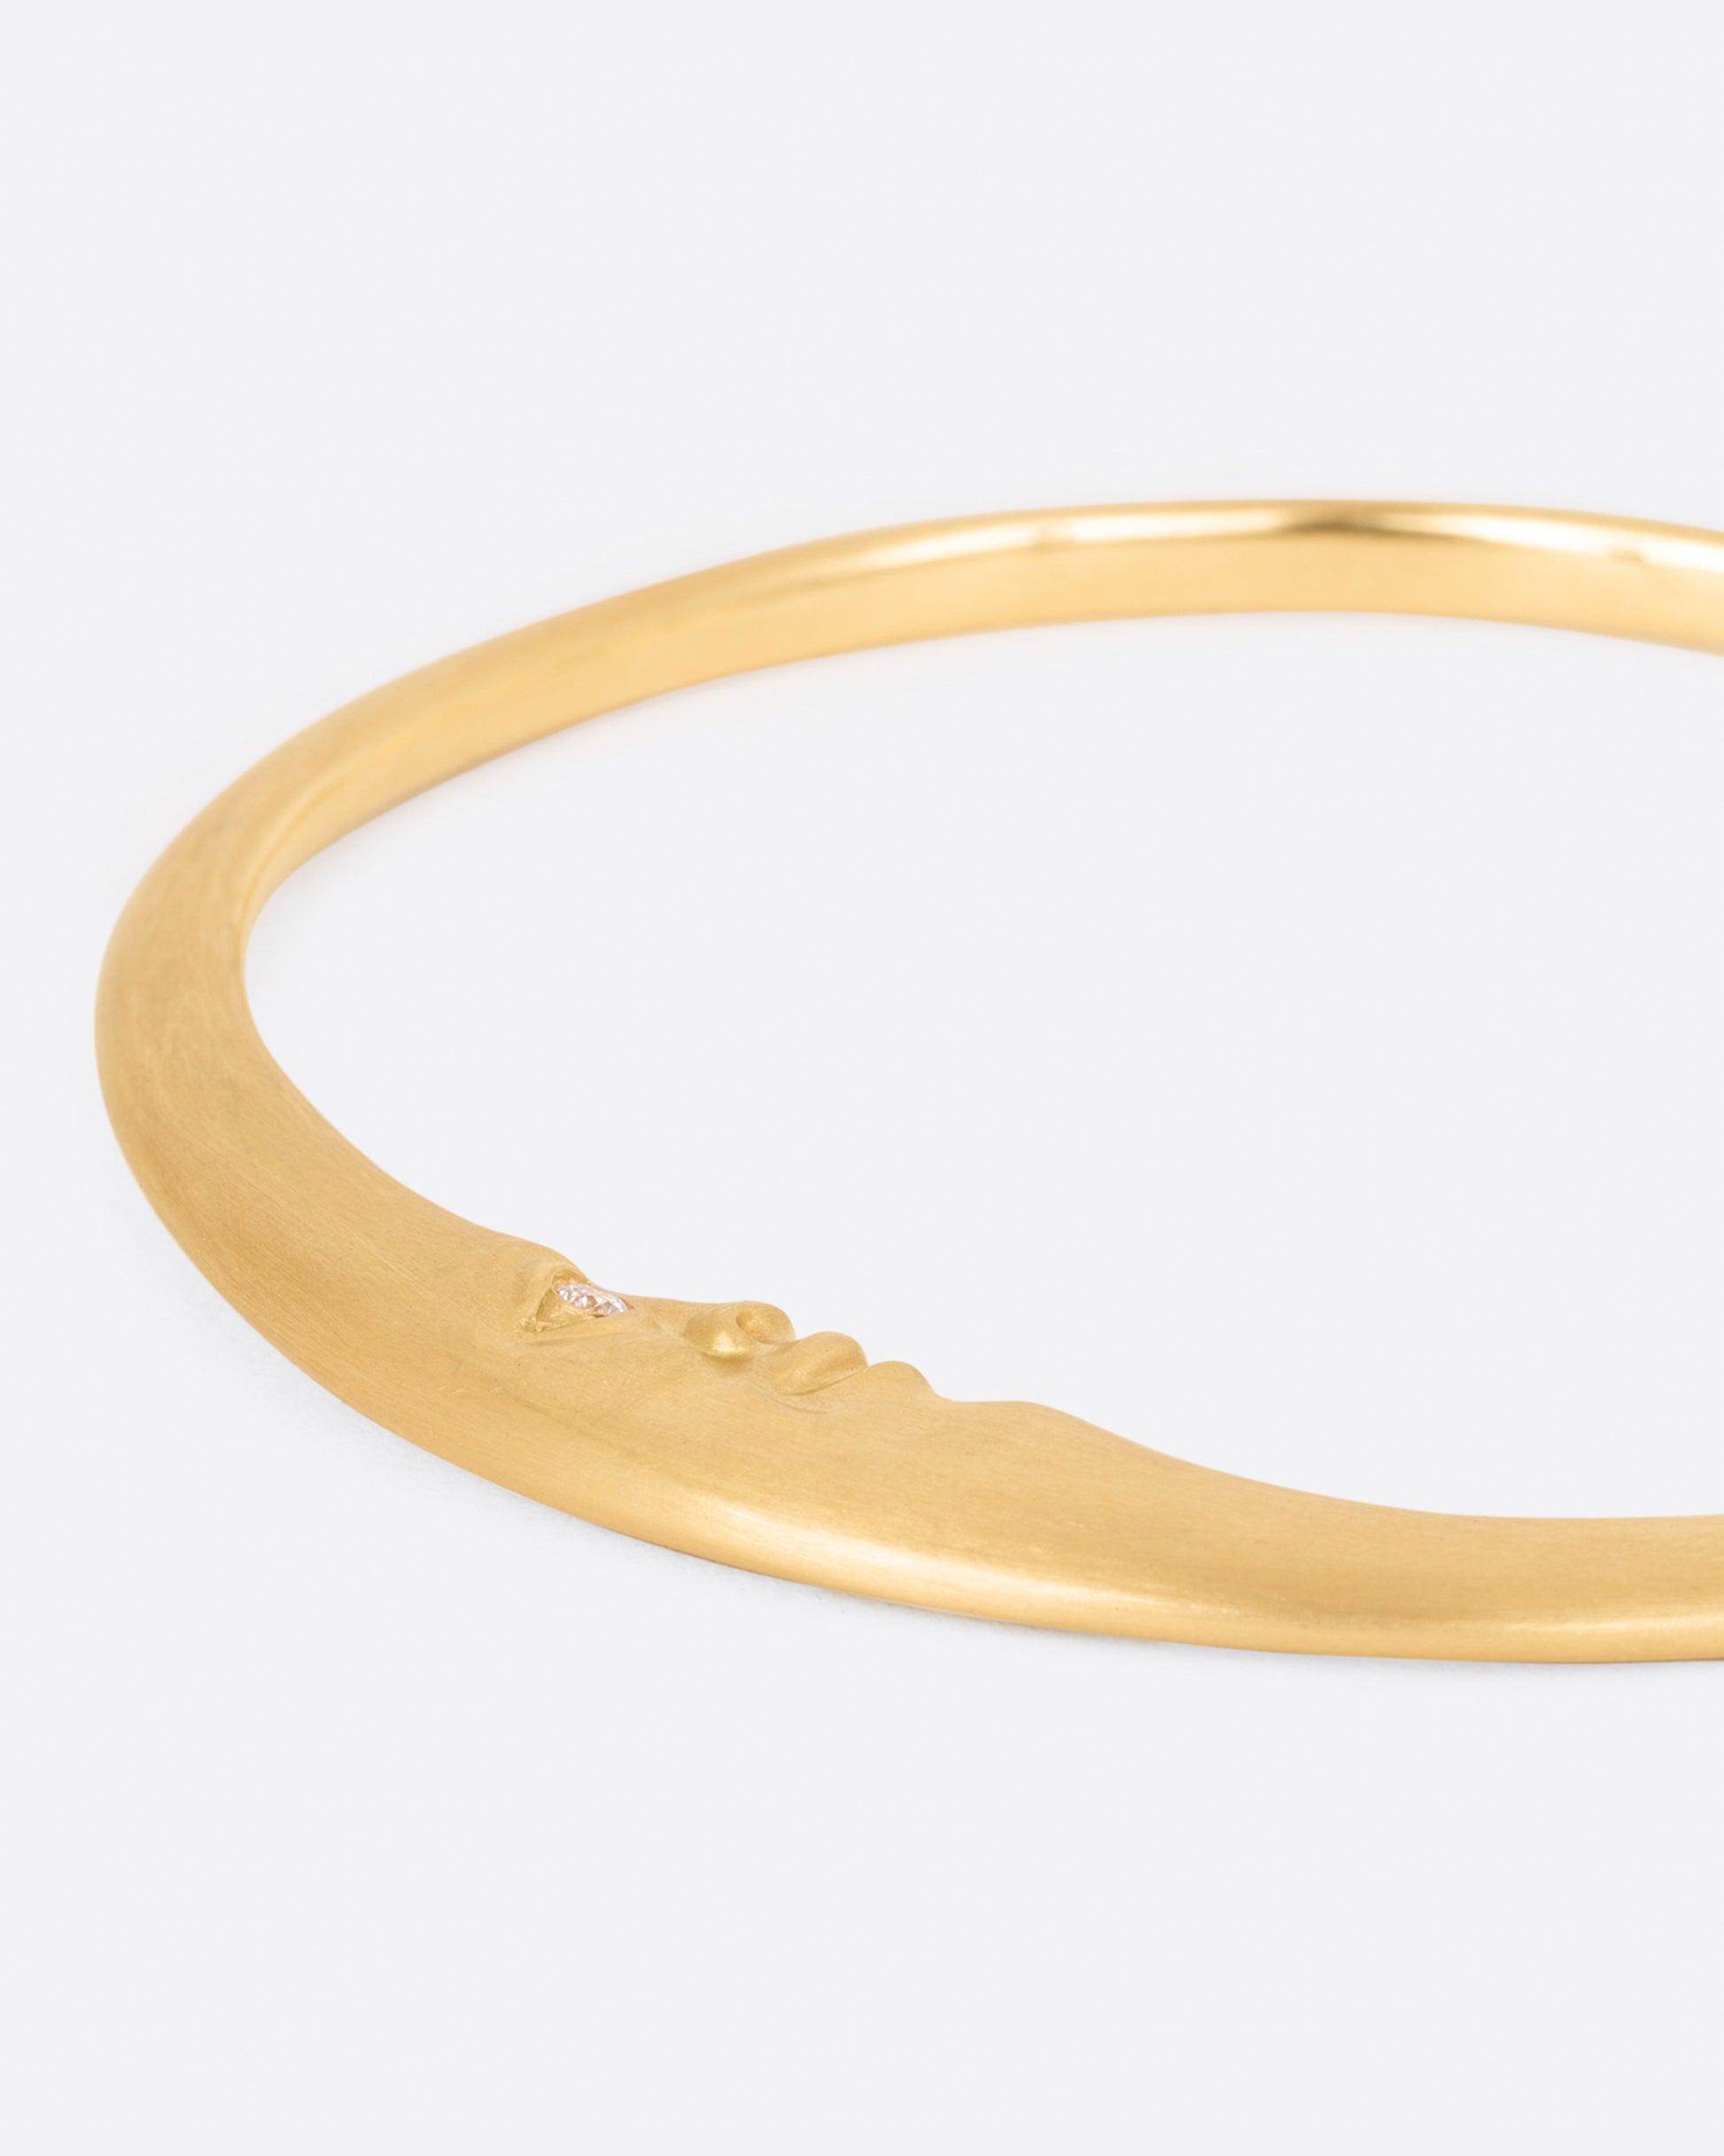 A yellow gold bangle bracelet with a moonface and diamond eyes, shown from the back.